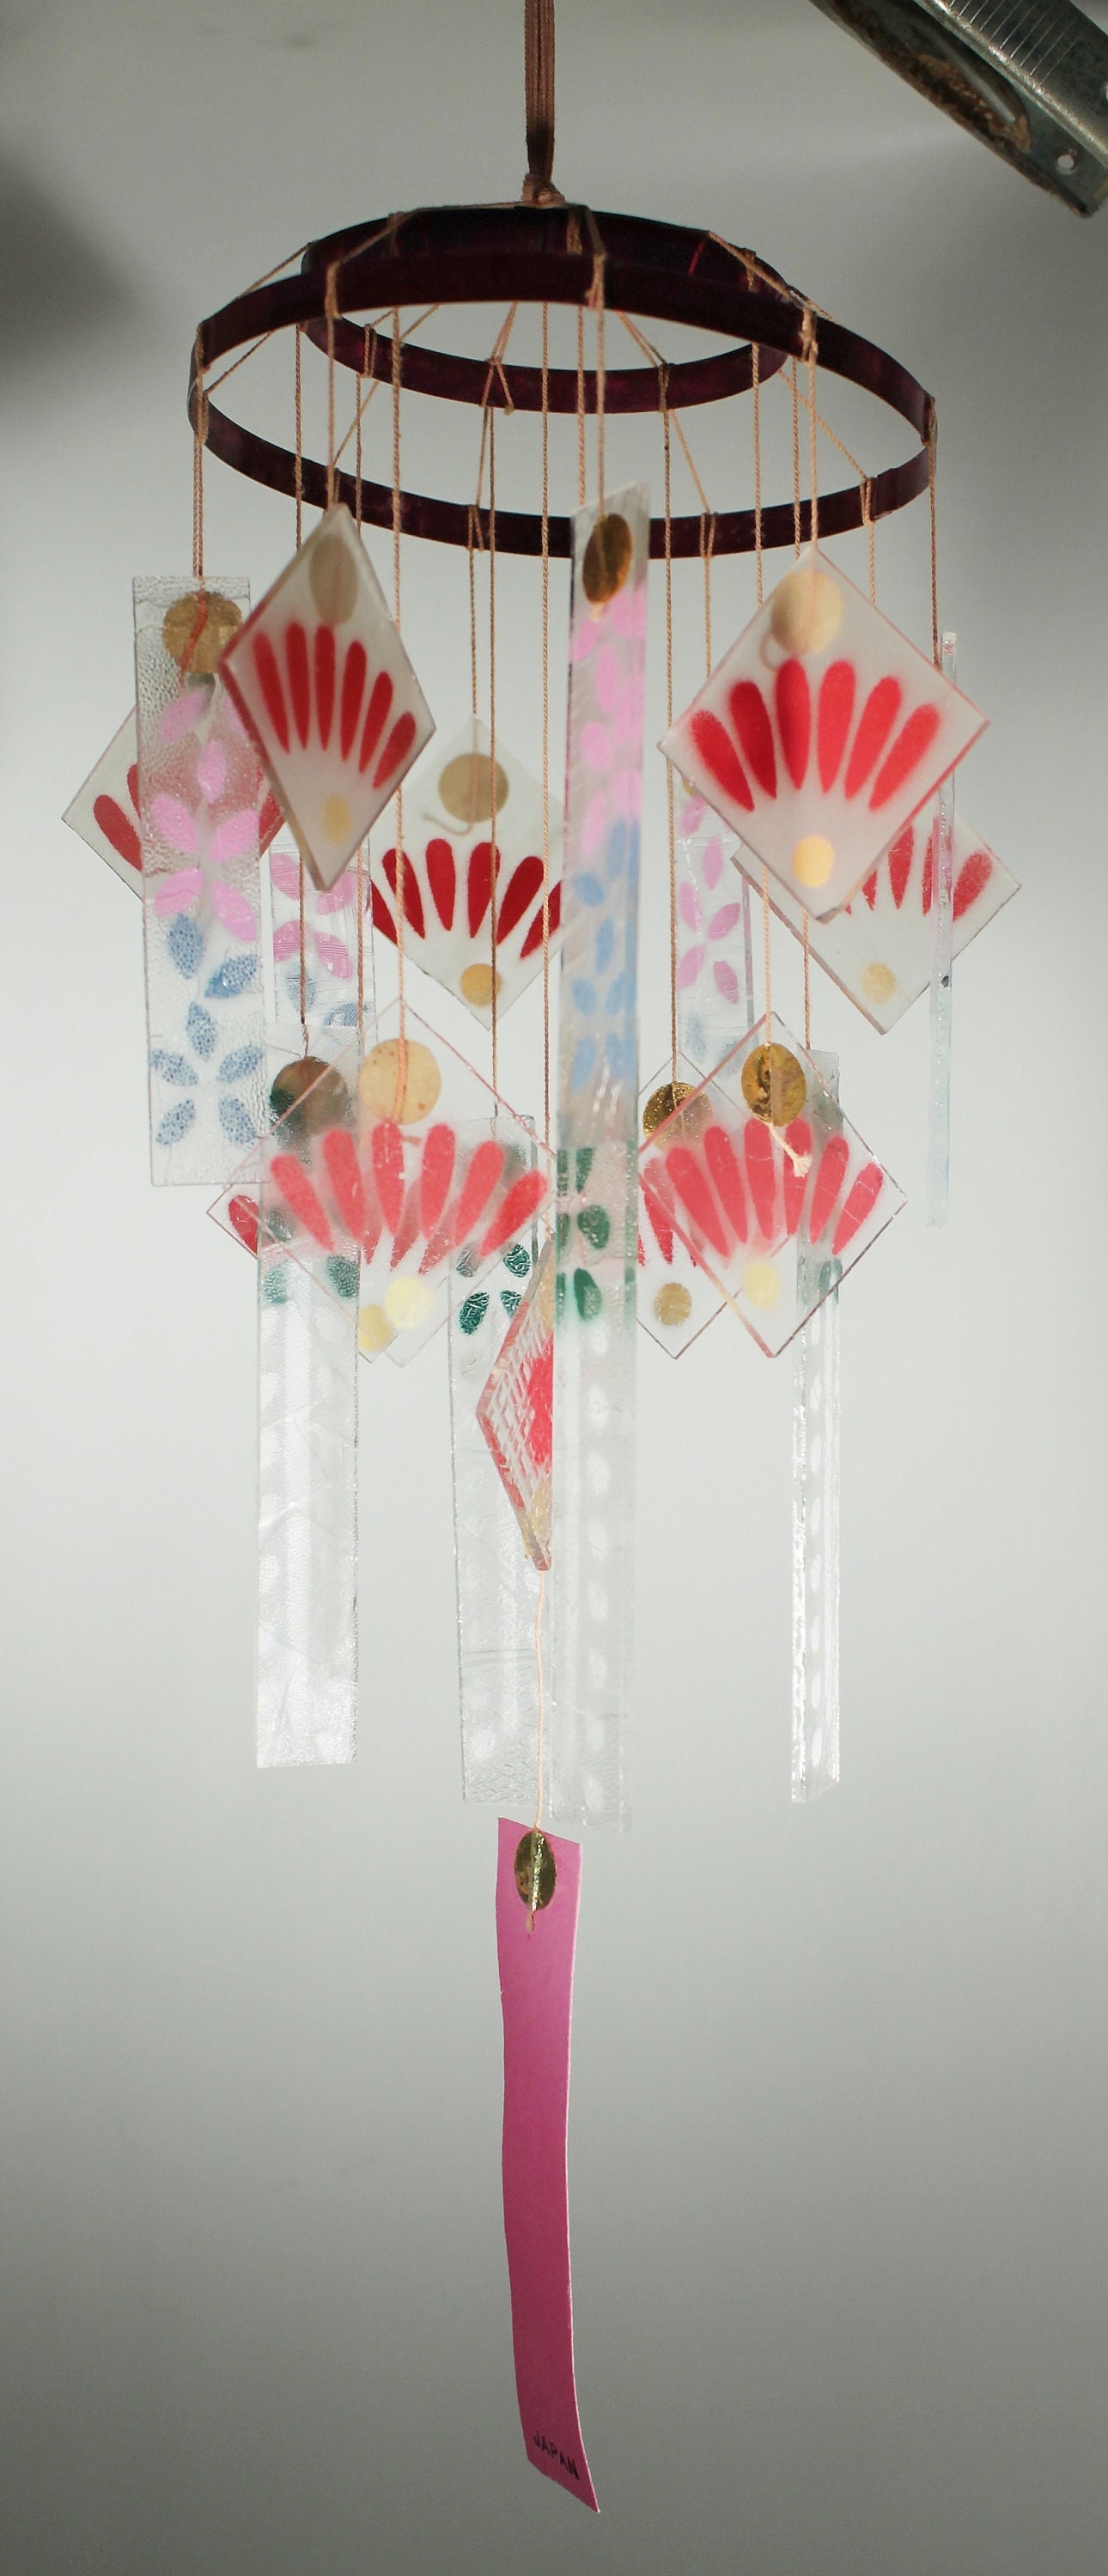 Vintage 1950's Japan Glass Wind Chimes 19 hangers of hand painted glass